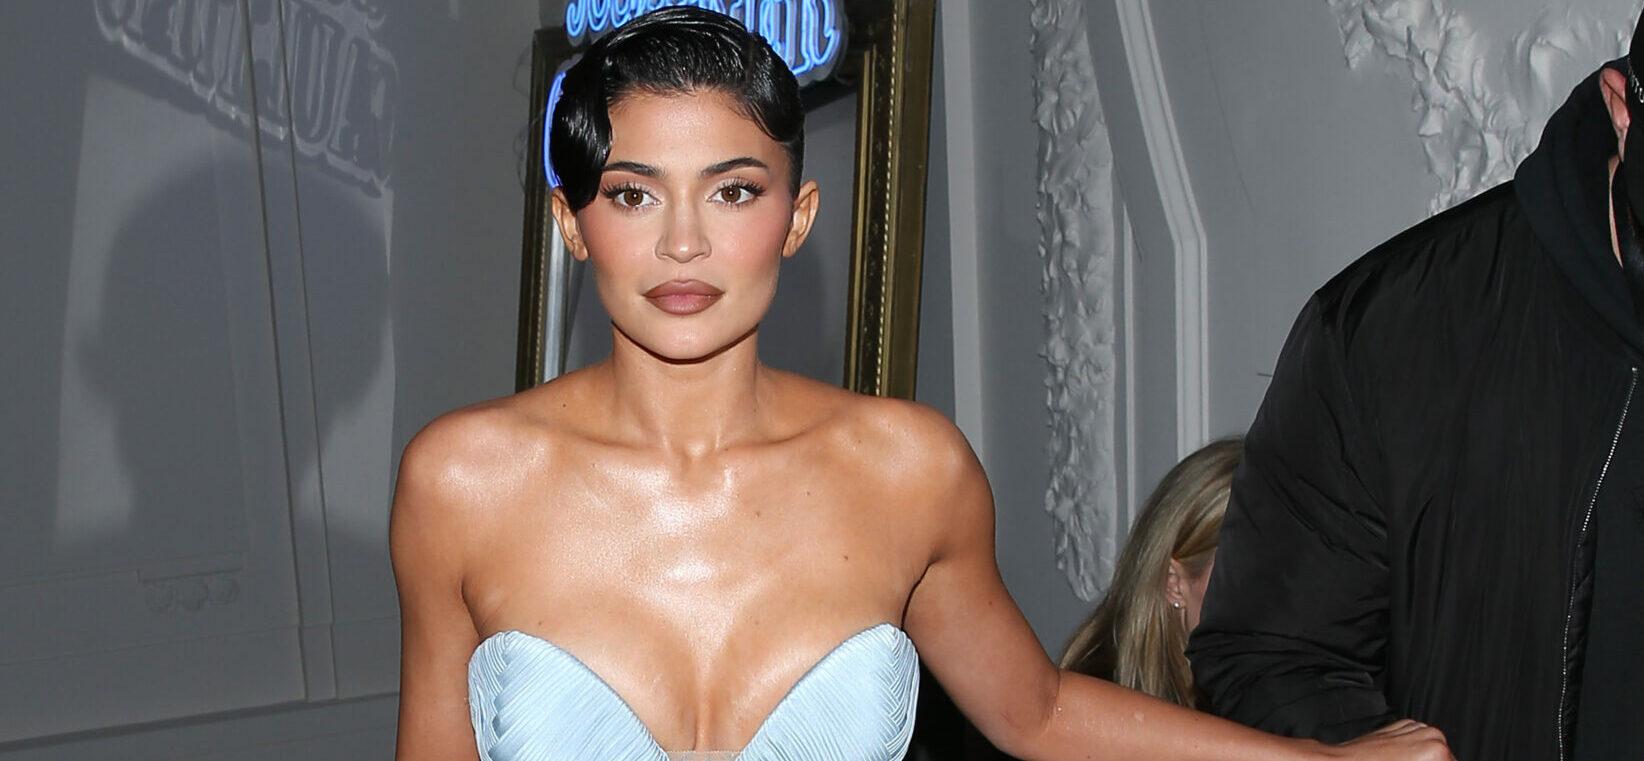 Kylie Jenner Called ‘Tone Deaf & Oblivious’ For ‘Stormi World’ 5th Birthday Party